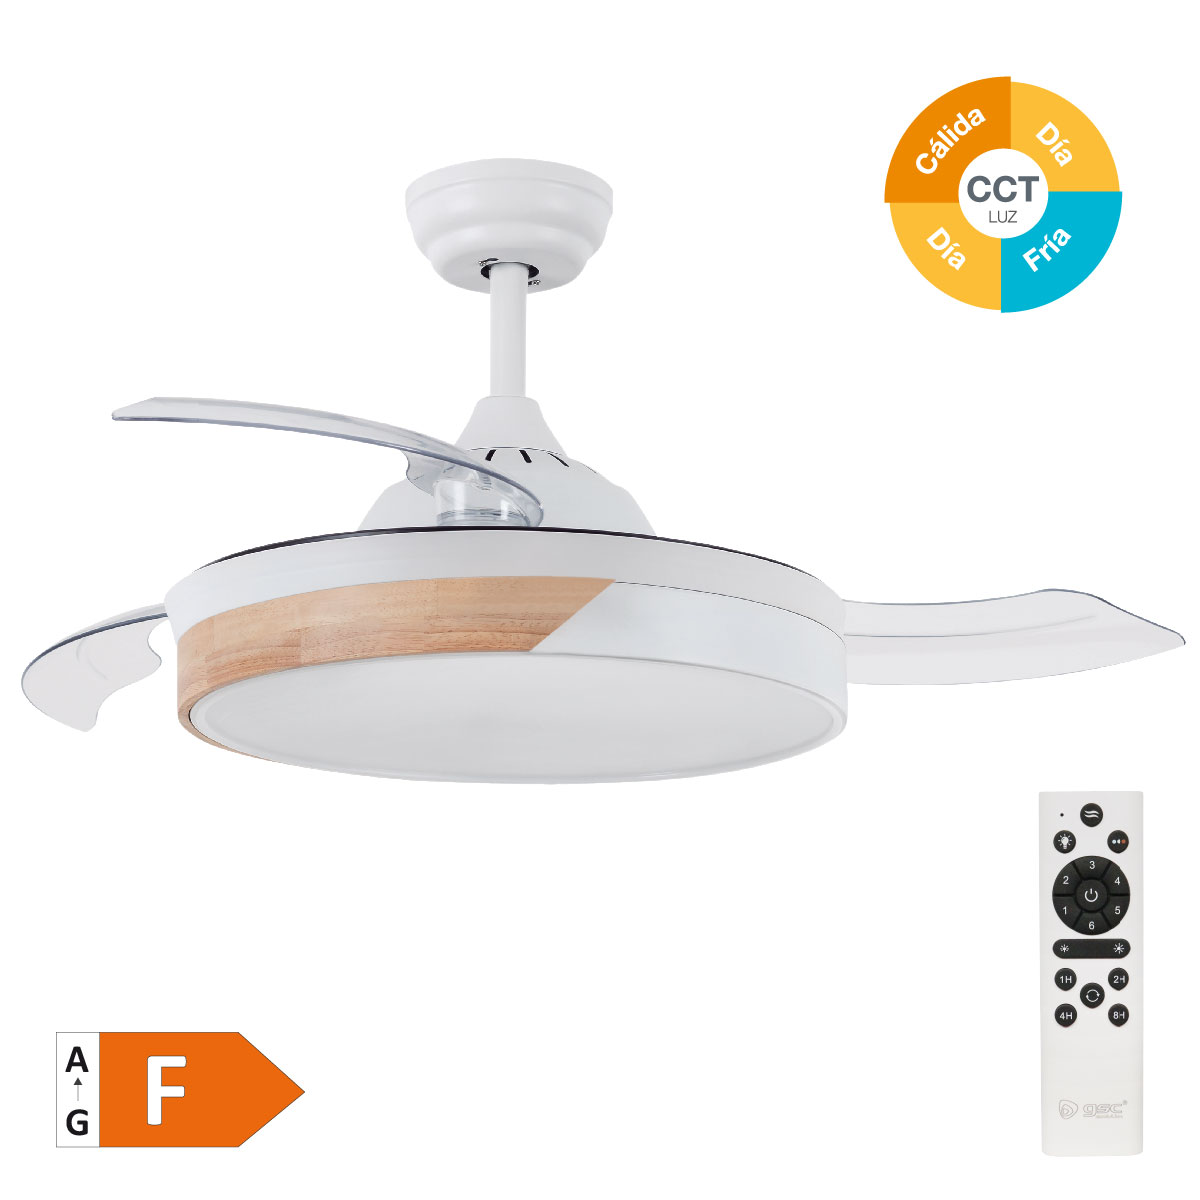 Likasi 42' DC ceiling fan with remote control CCT 3 retractable blades transparent Natural/White